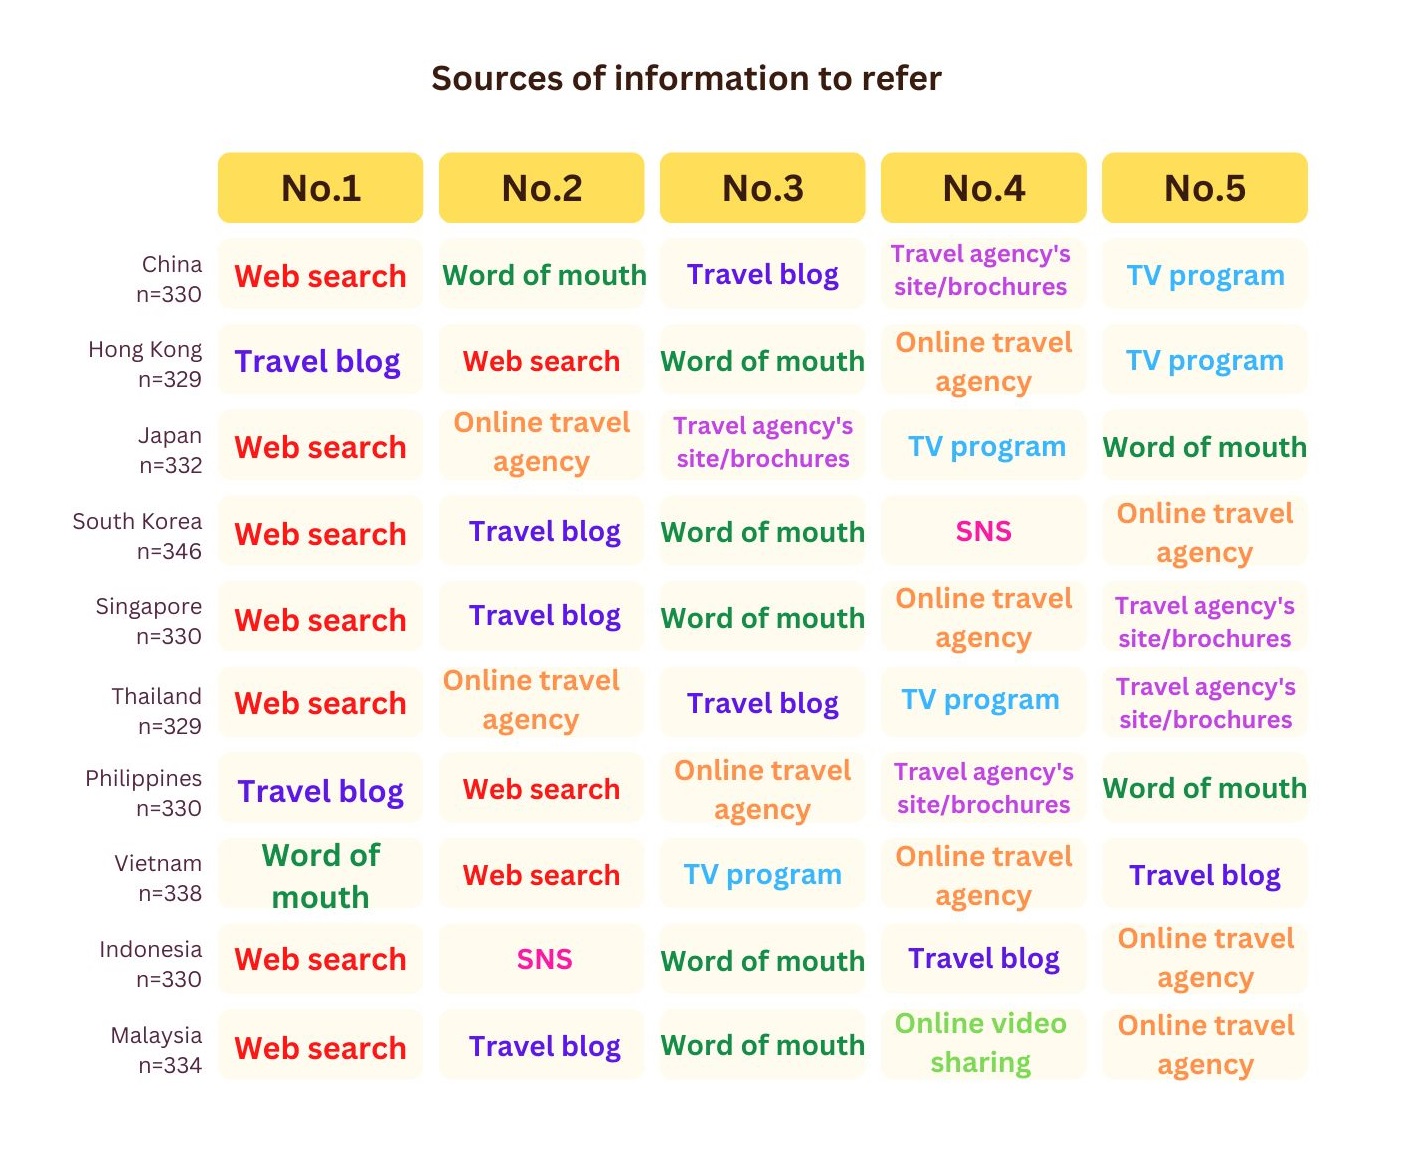 Chart 4: Sources of information to refer